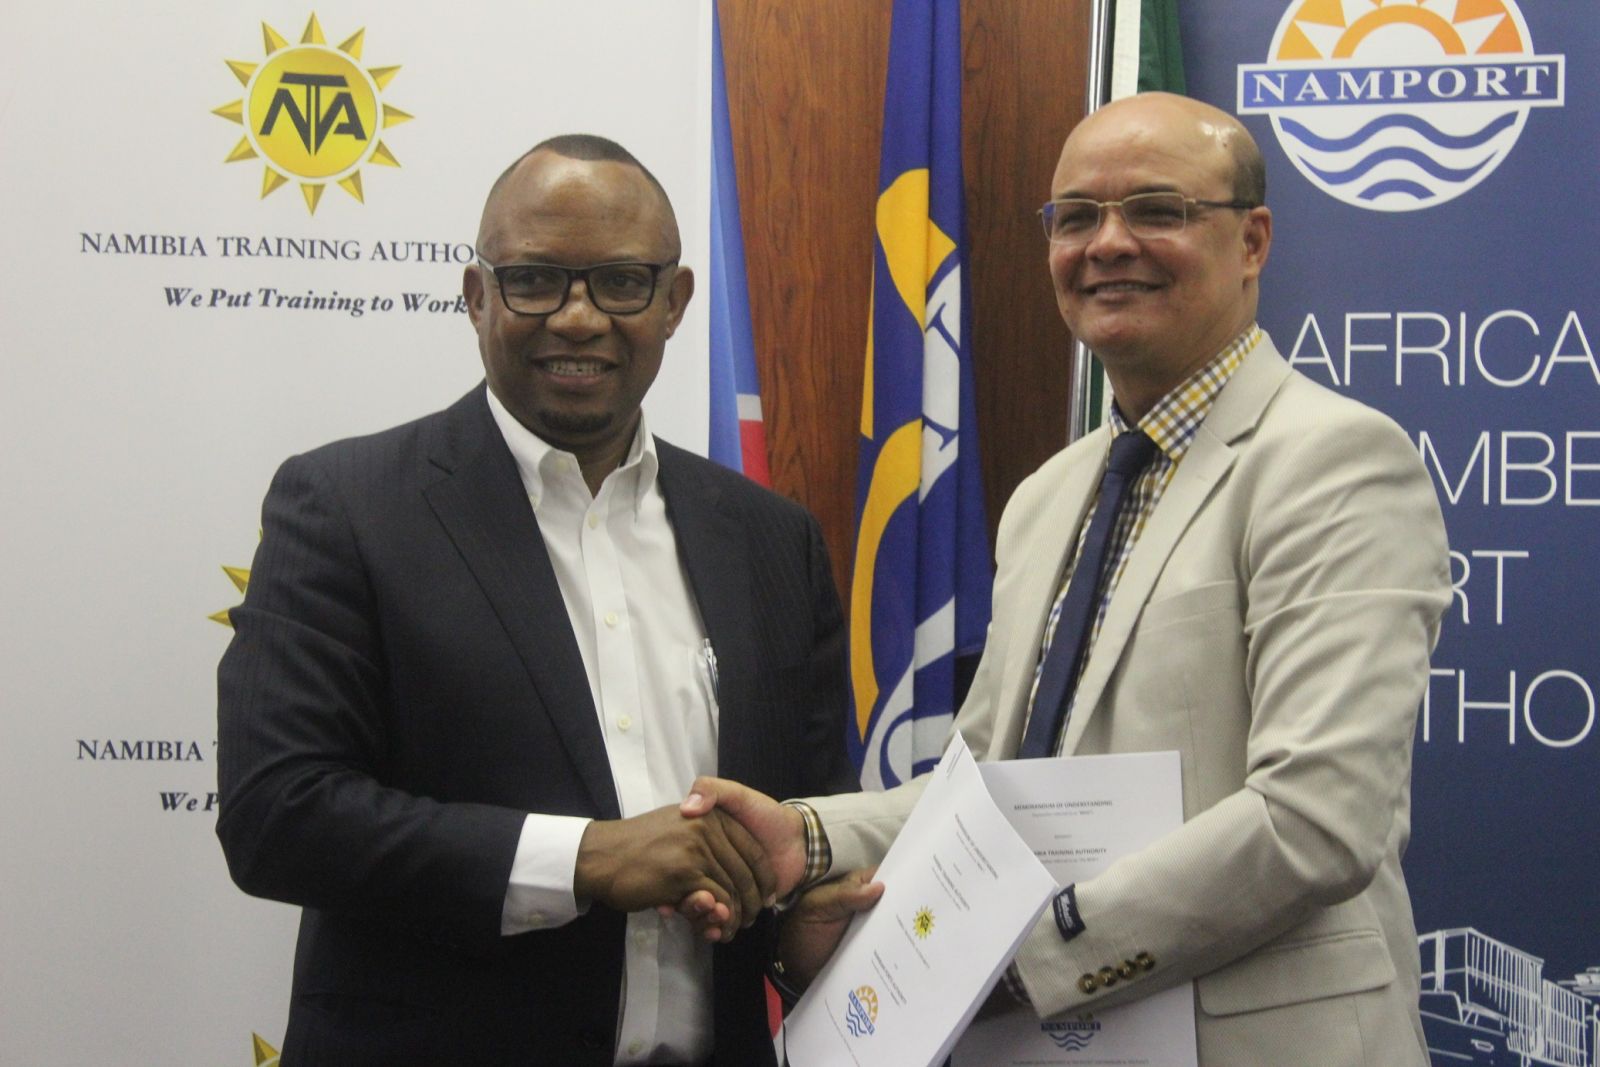 Namport signs an MoA with NTA